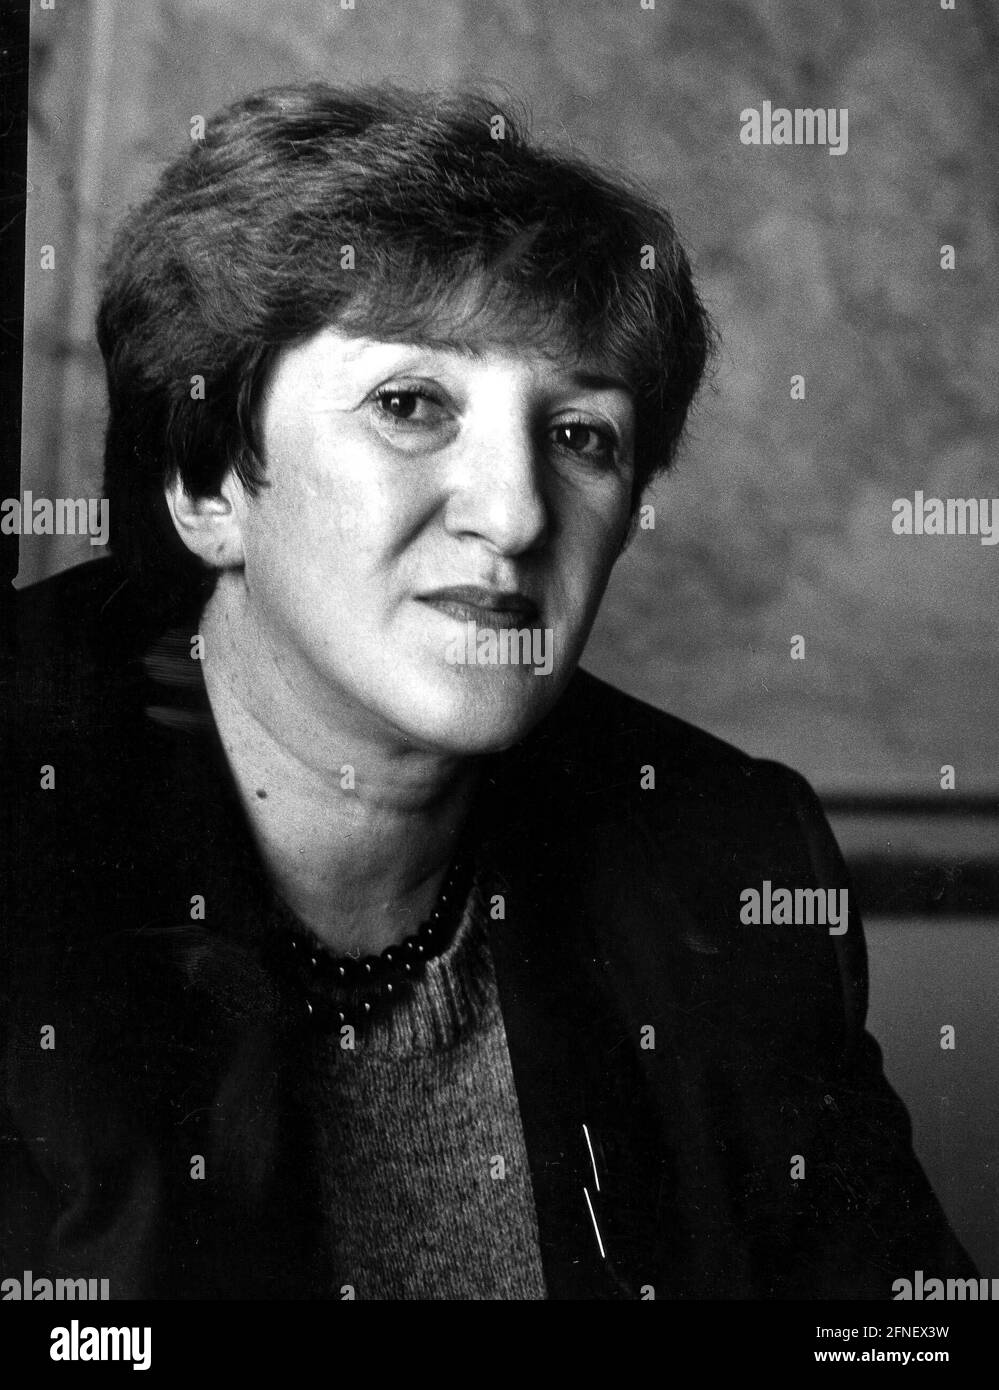 Galina Storovoitova, Russian politician assassinated in St.Petersburg in 1998. Moscow (1998). [automated translation] Stock Photo